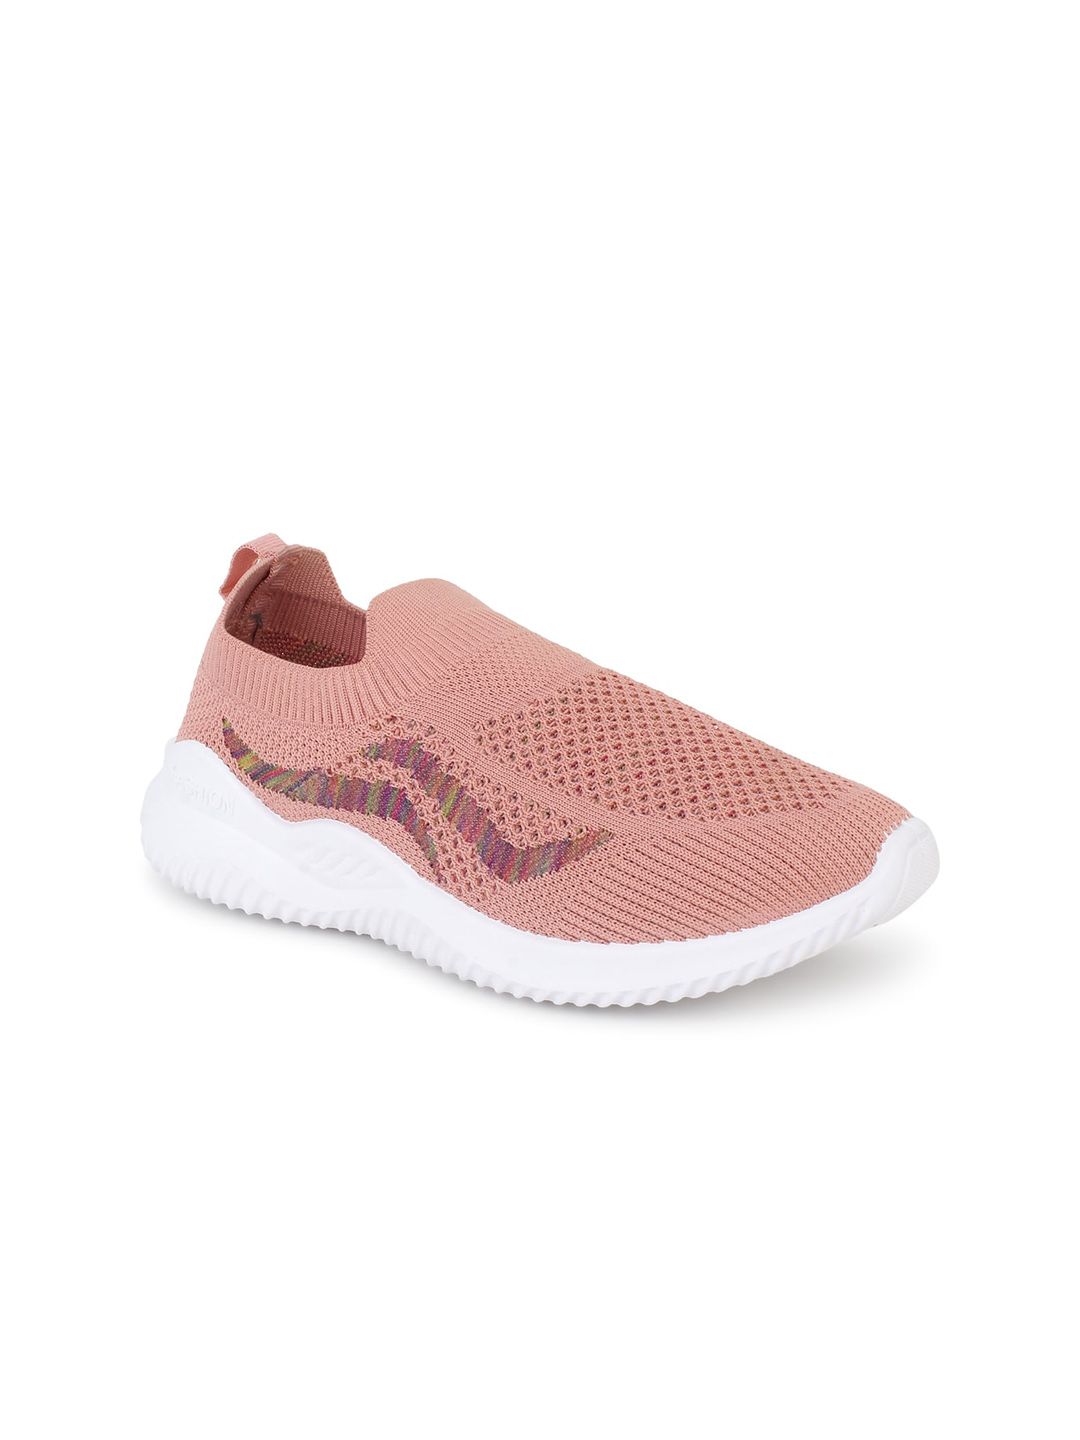 Champs Women Peach-Coloured Woven Design Lightweight Slip-On Sneakers Price in India